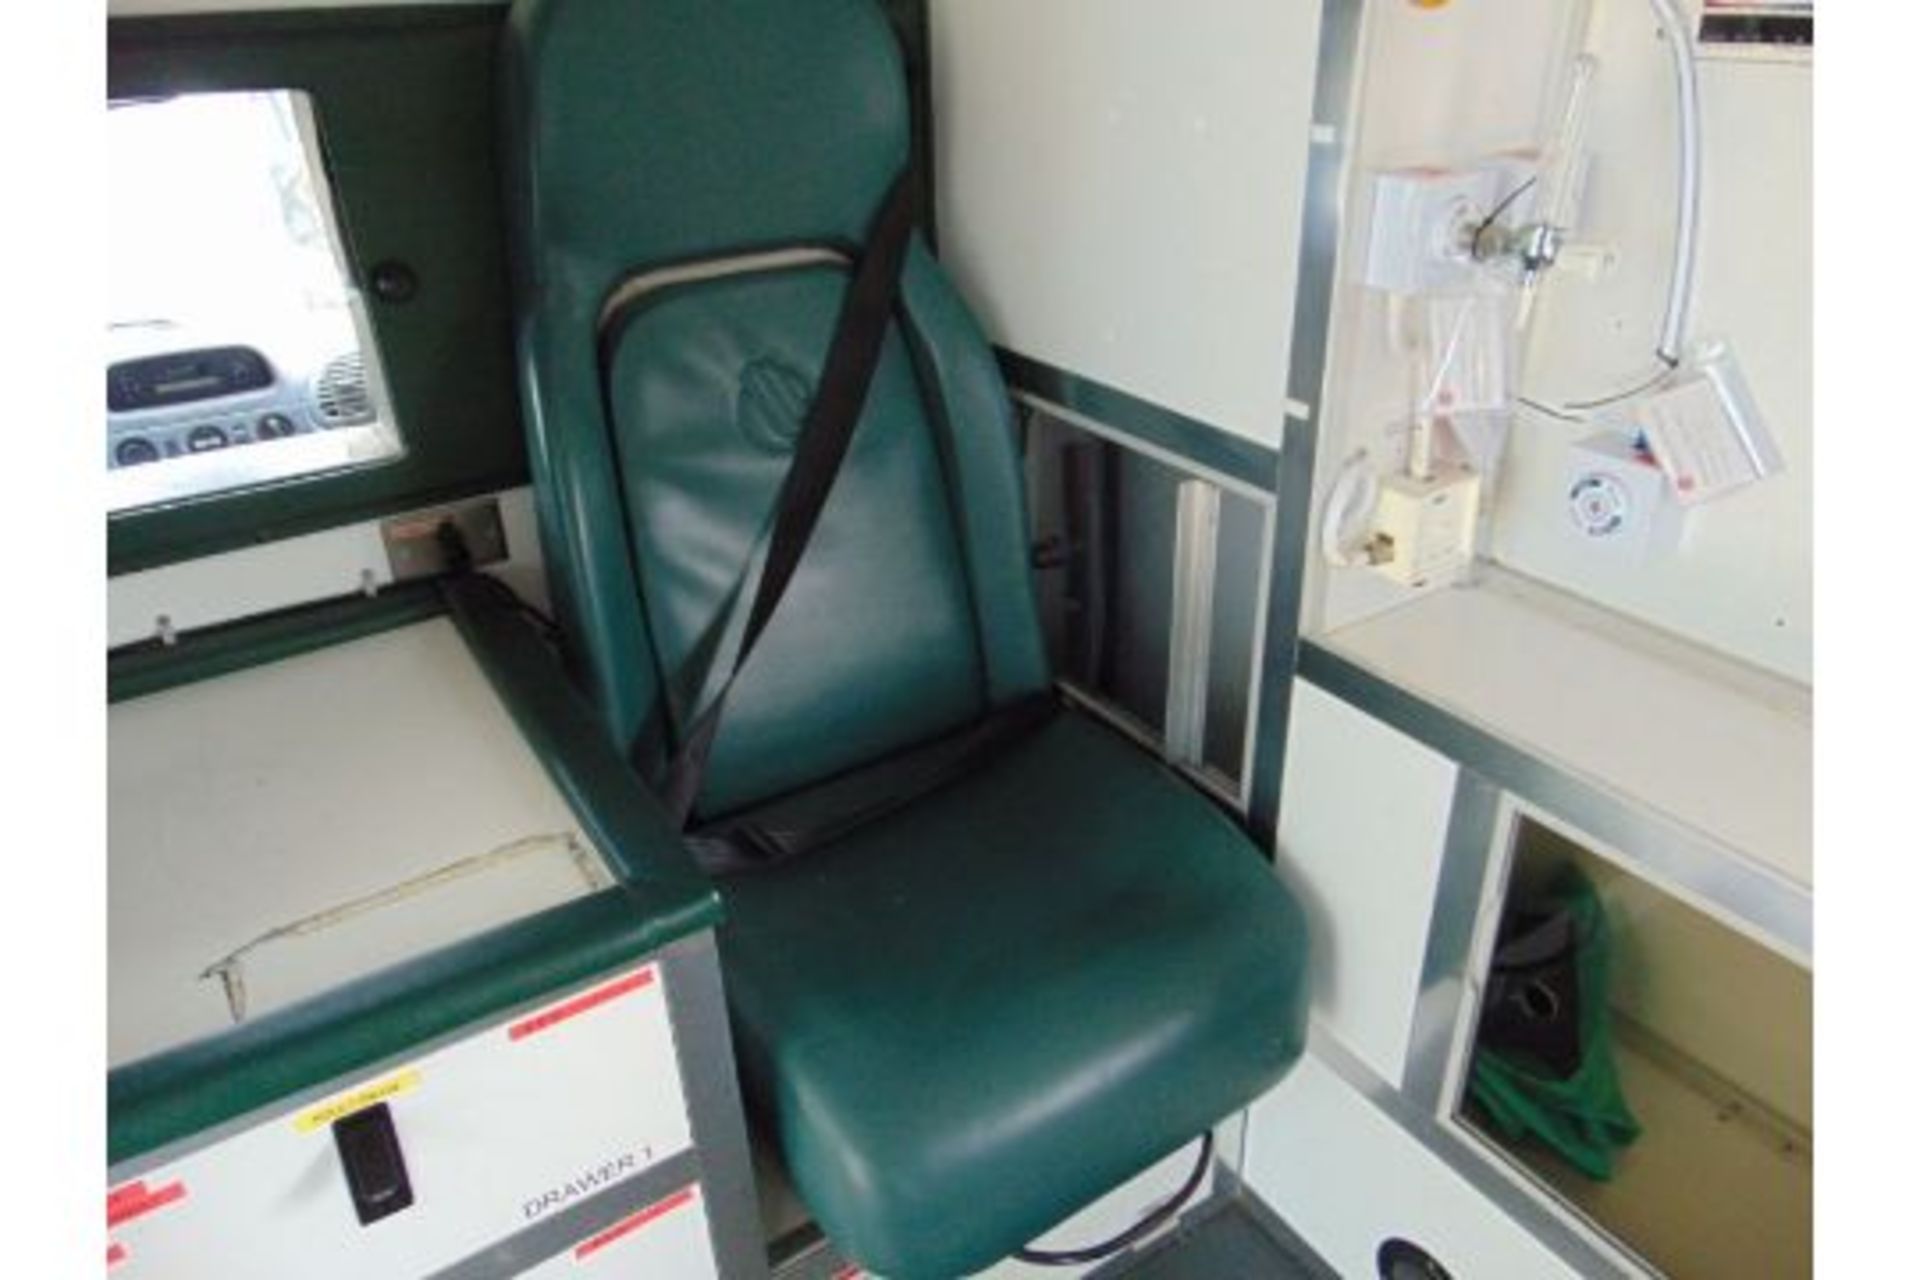 Recent Released by Atomic Weapons Establishment a 2002 Mercedes 418 CDi Ambulance ONLY 32,825 Miles - Image 14 of 34